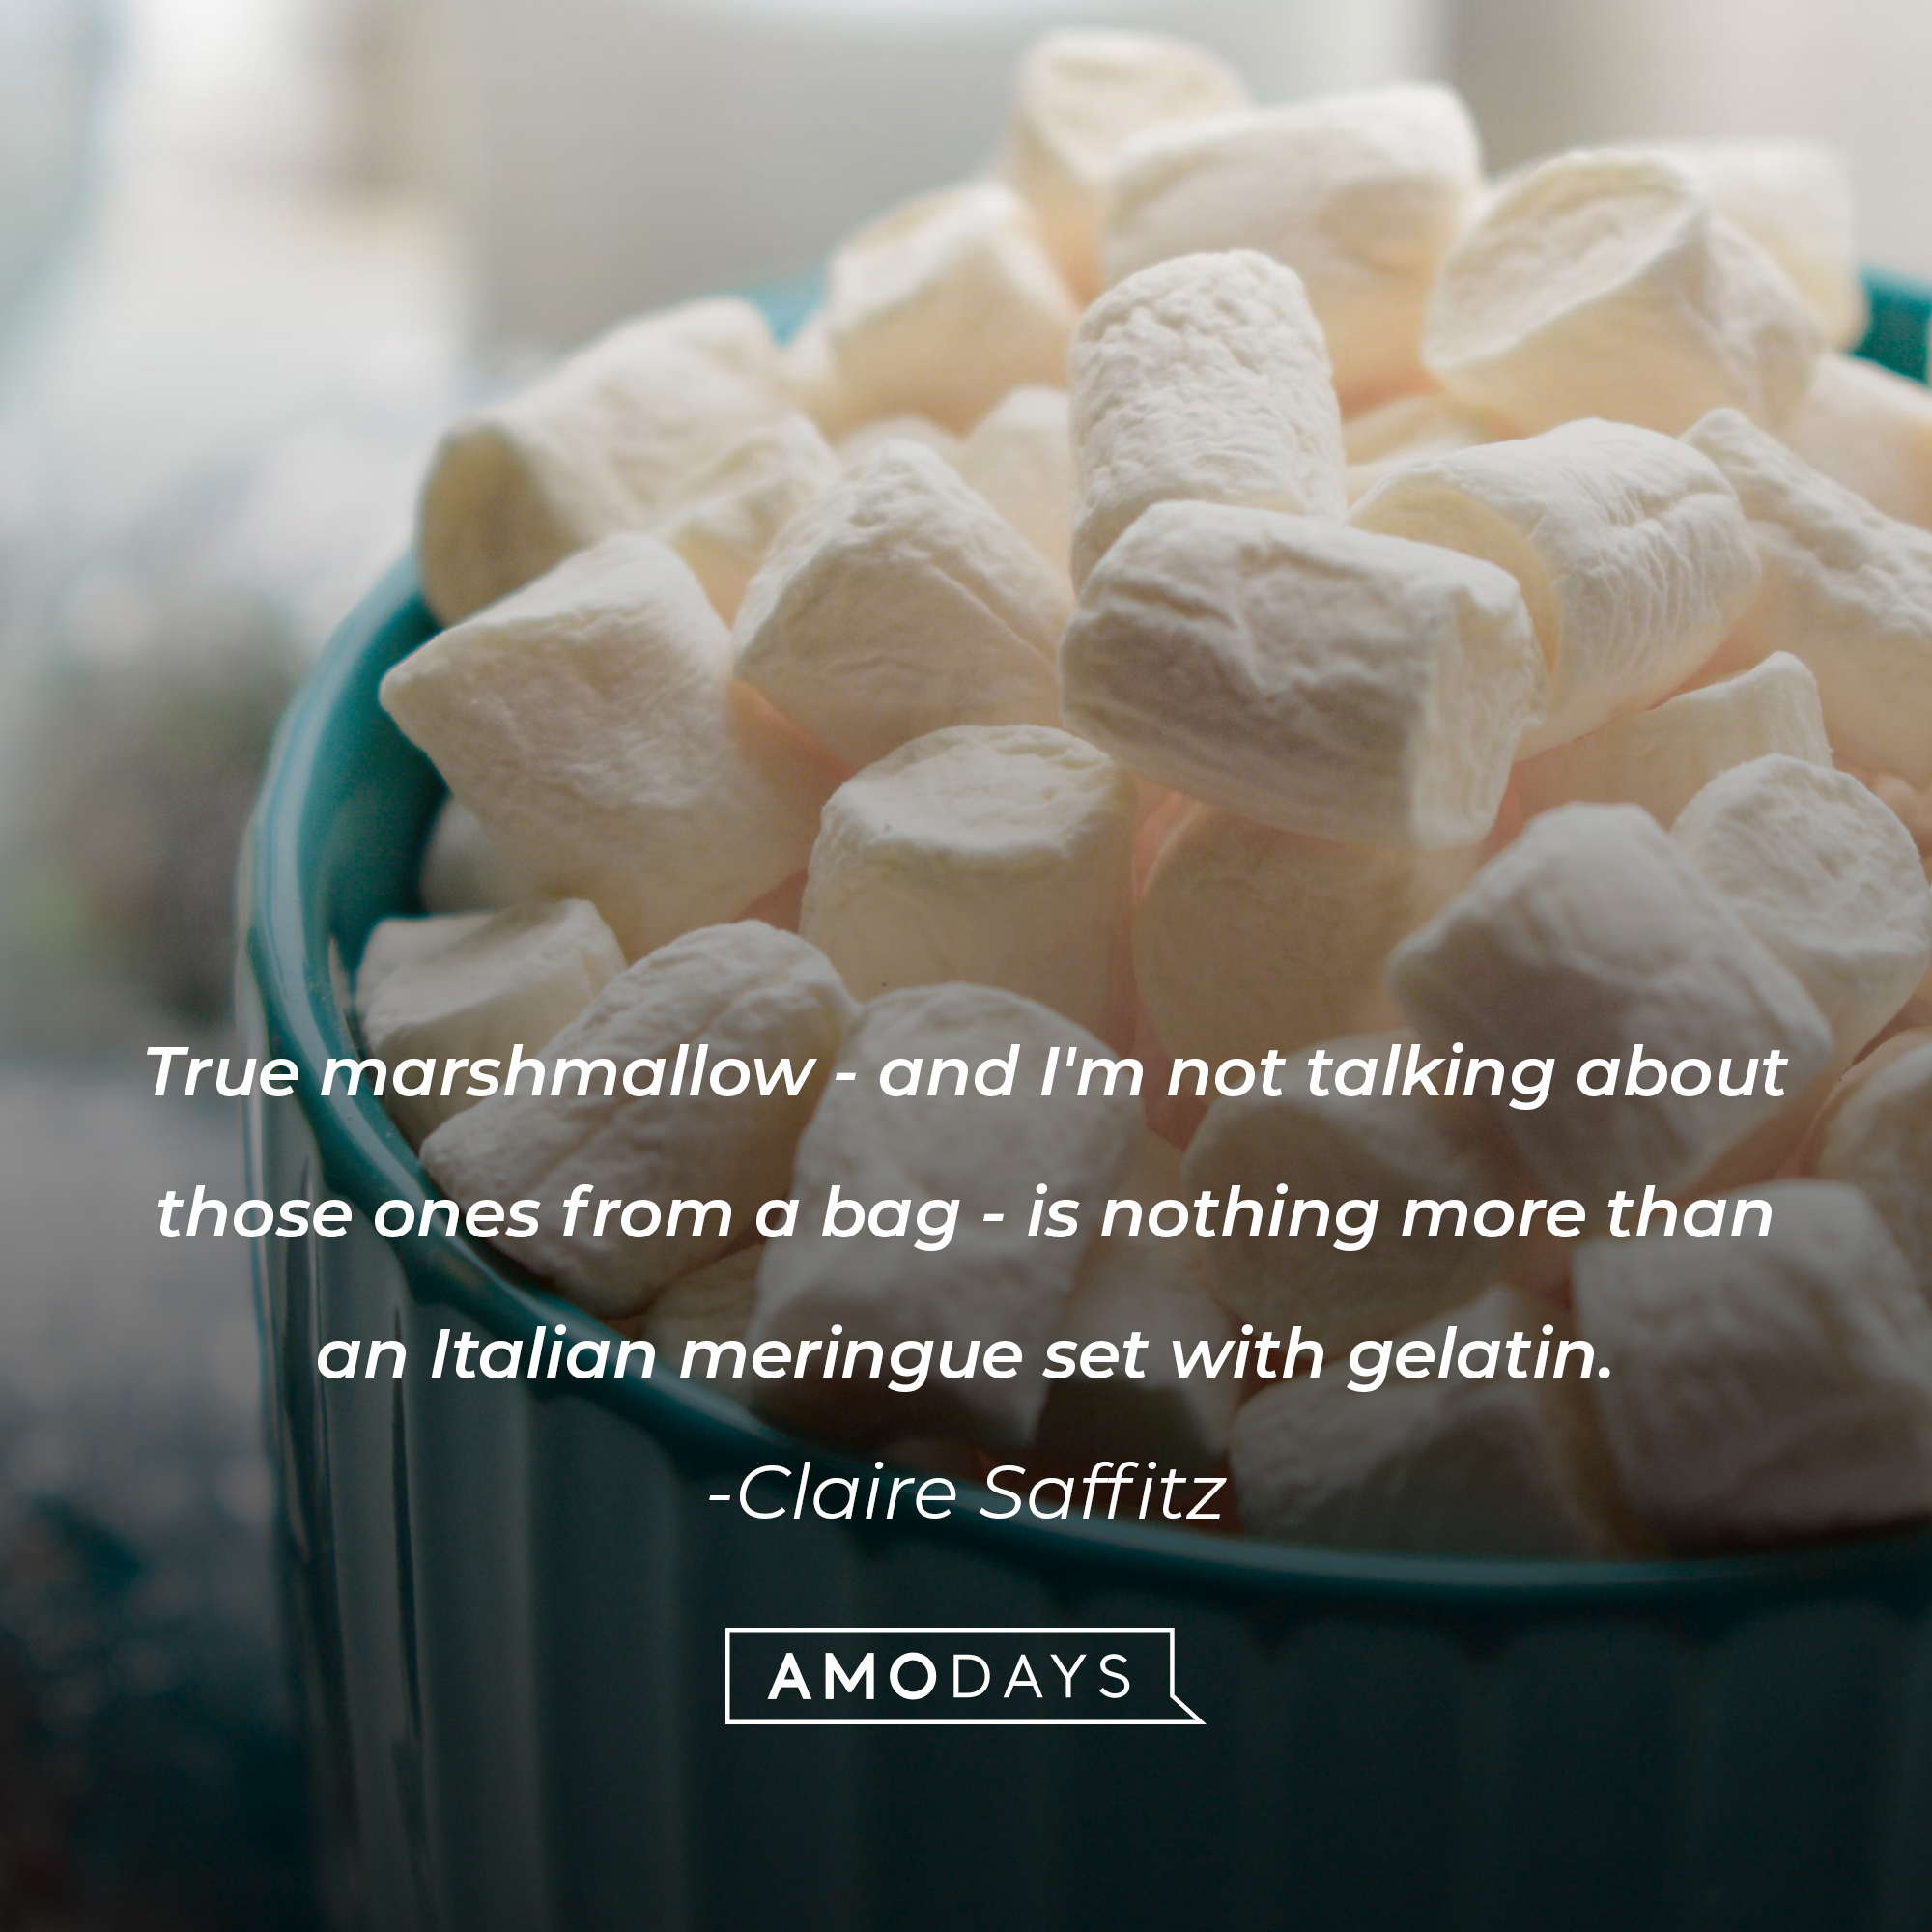 Claire Saffitz's quote: "True marshmallow - and I'm not talking about those ones from a bag - is nothing more than an Italian meringue set with gelatin." Source: Brainyquote